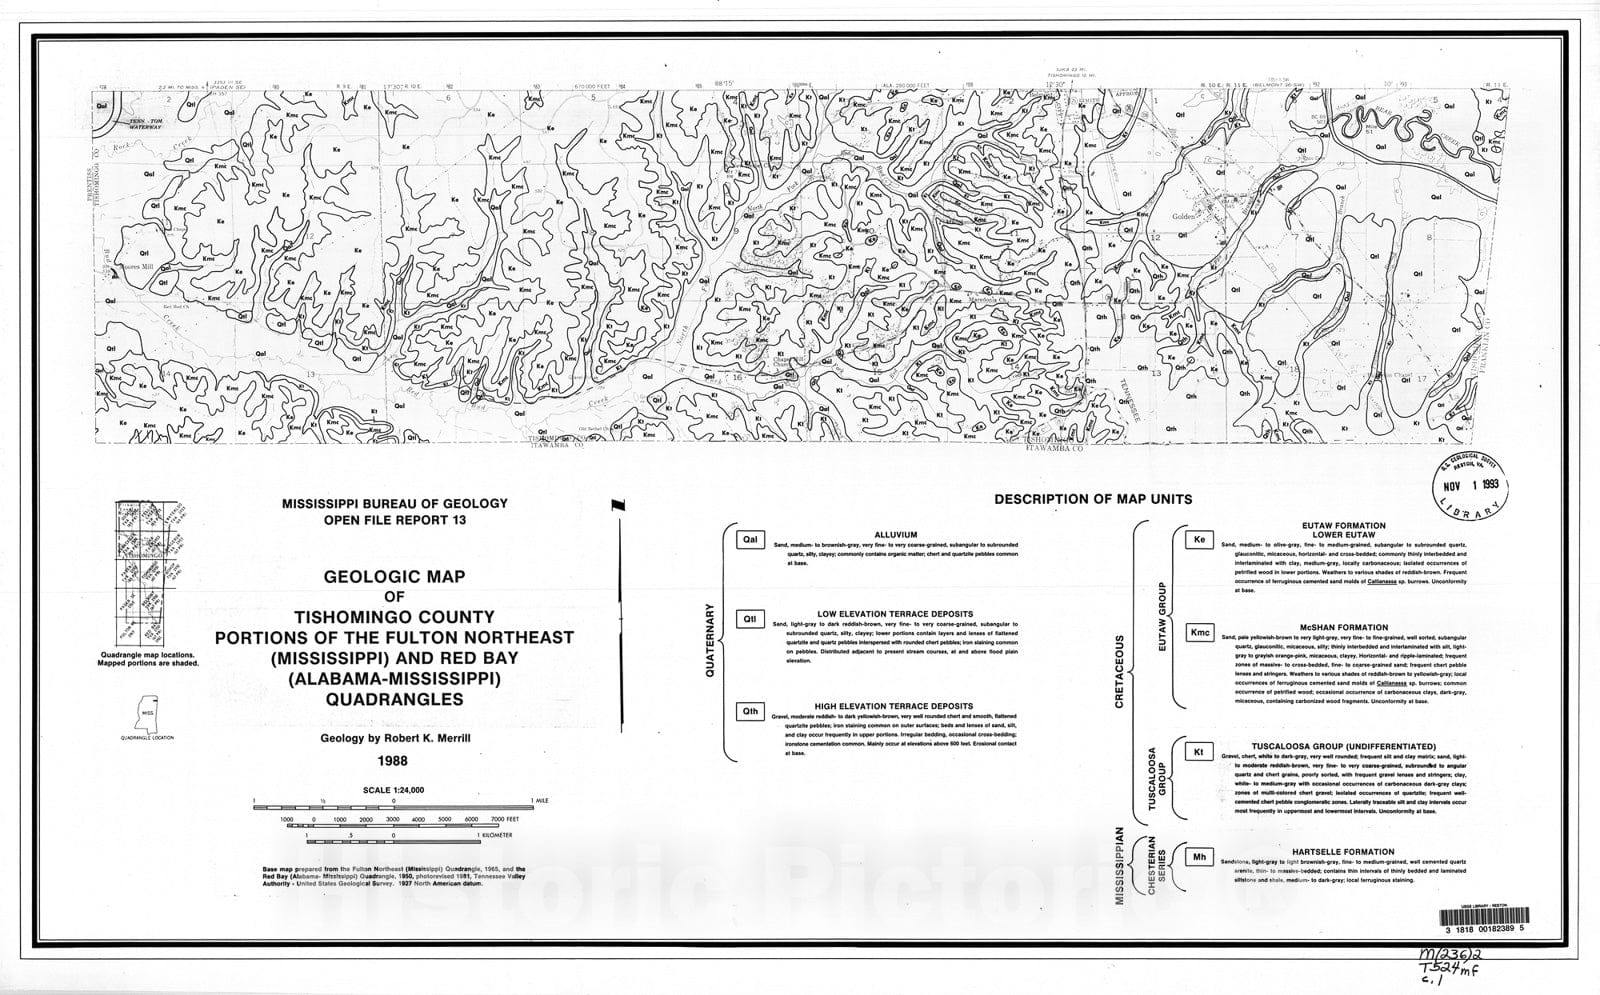 Map : Geologic map of the Tishomingo County portions of the Fulton Northeast (Mississippi) and Red Bay (Alabama - Mississippi) quadrangles, 1988 Cartography Wall Art :